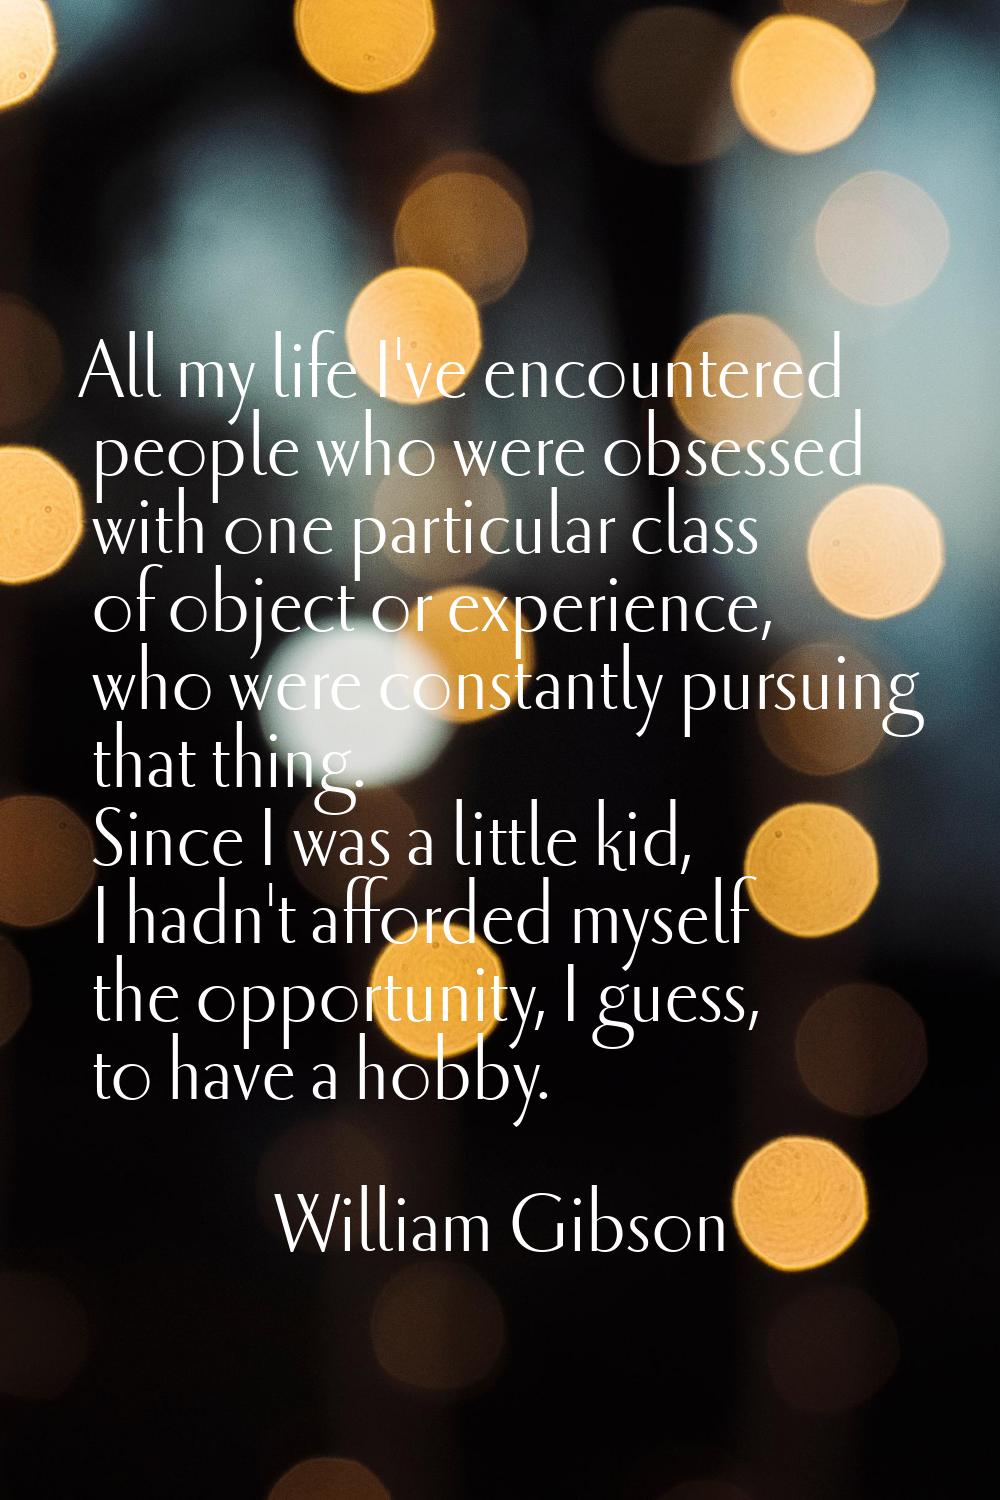 All my life I've encountered people who were obsessed with one particular class of object or experi